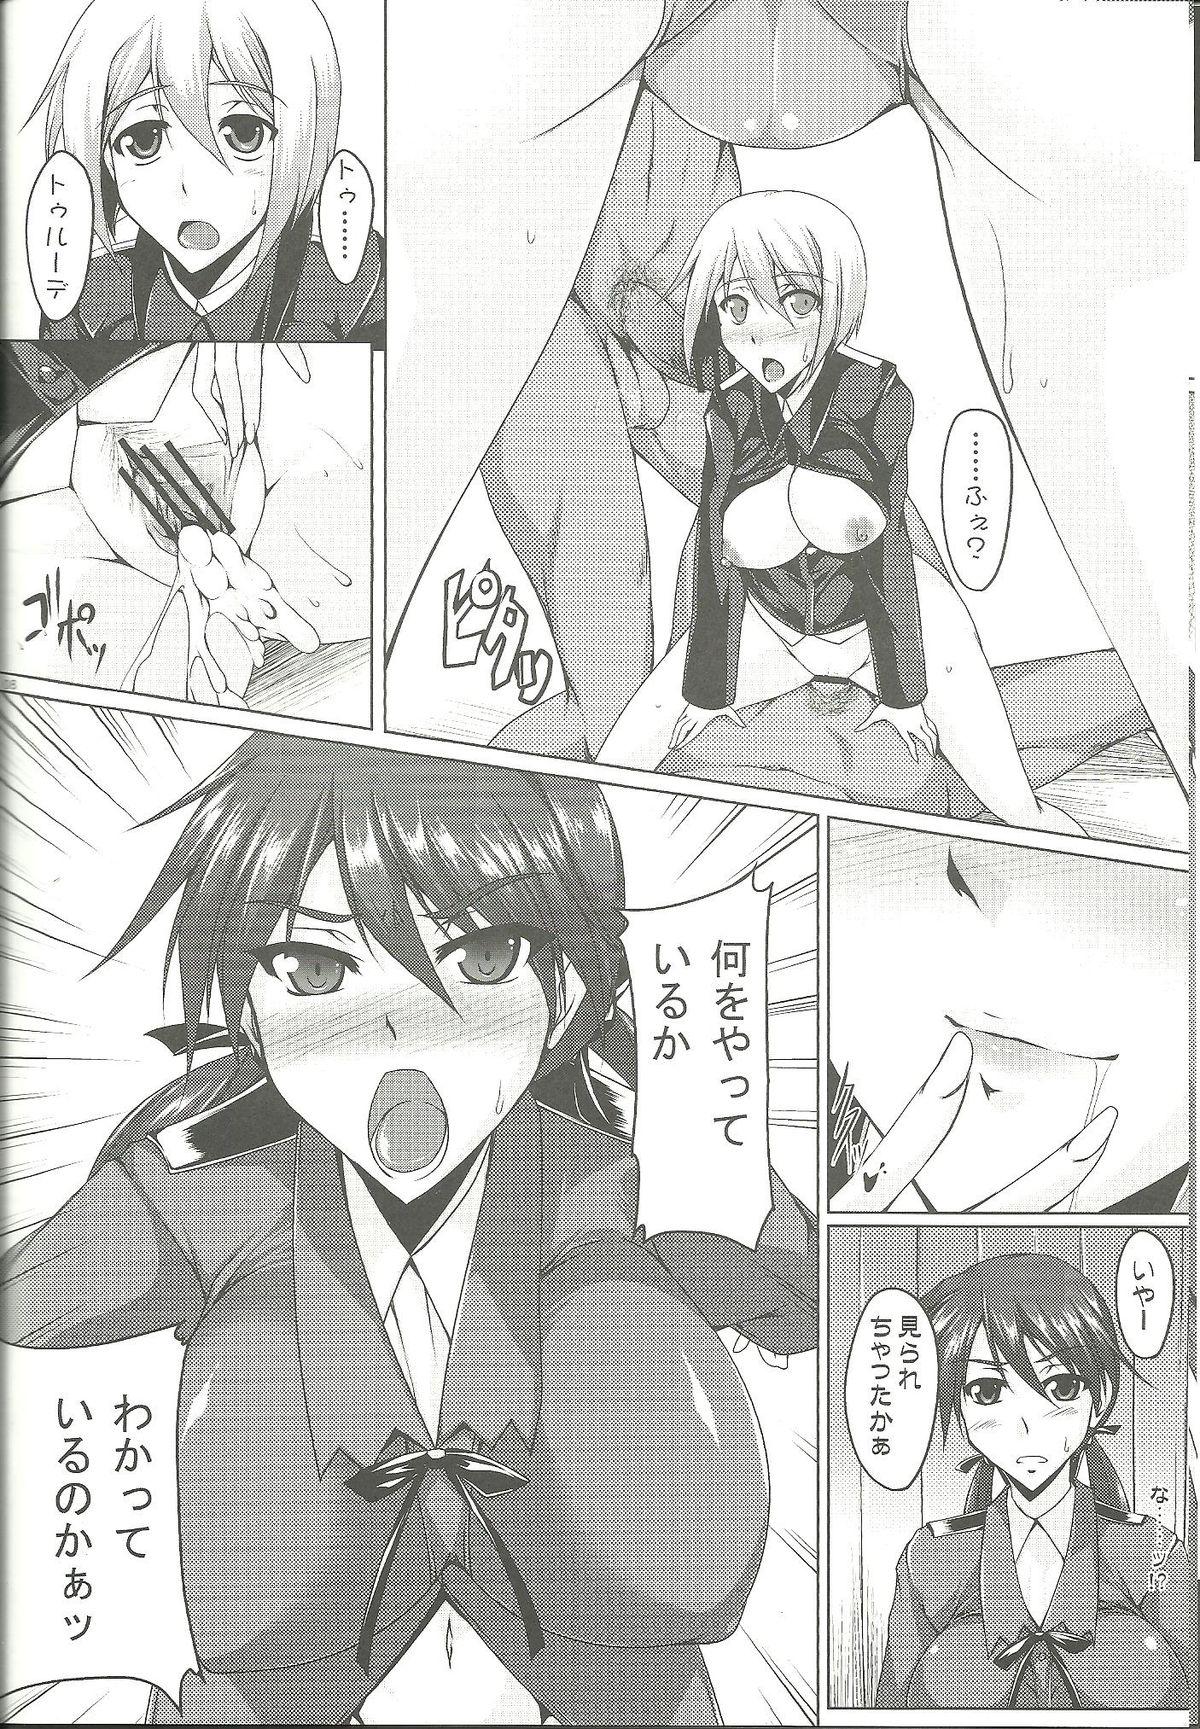 Safadinha Booby Trap - Strike witches Bigcock - Page 7